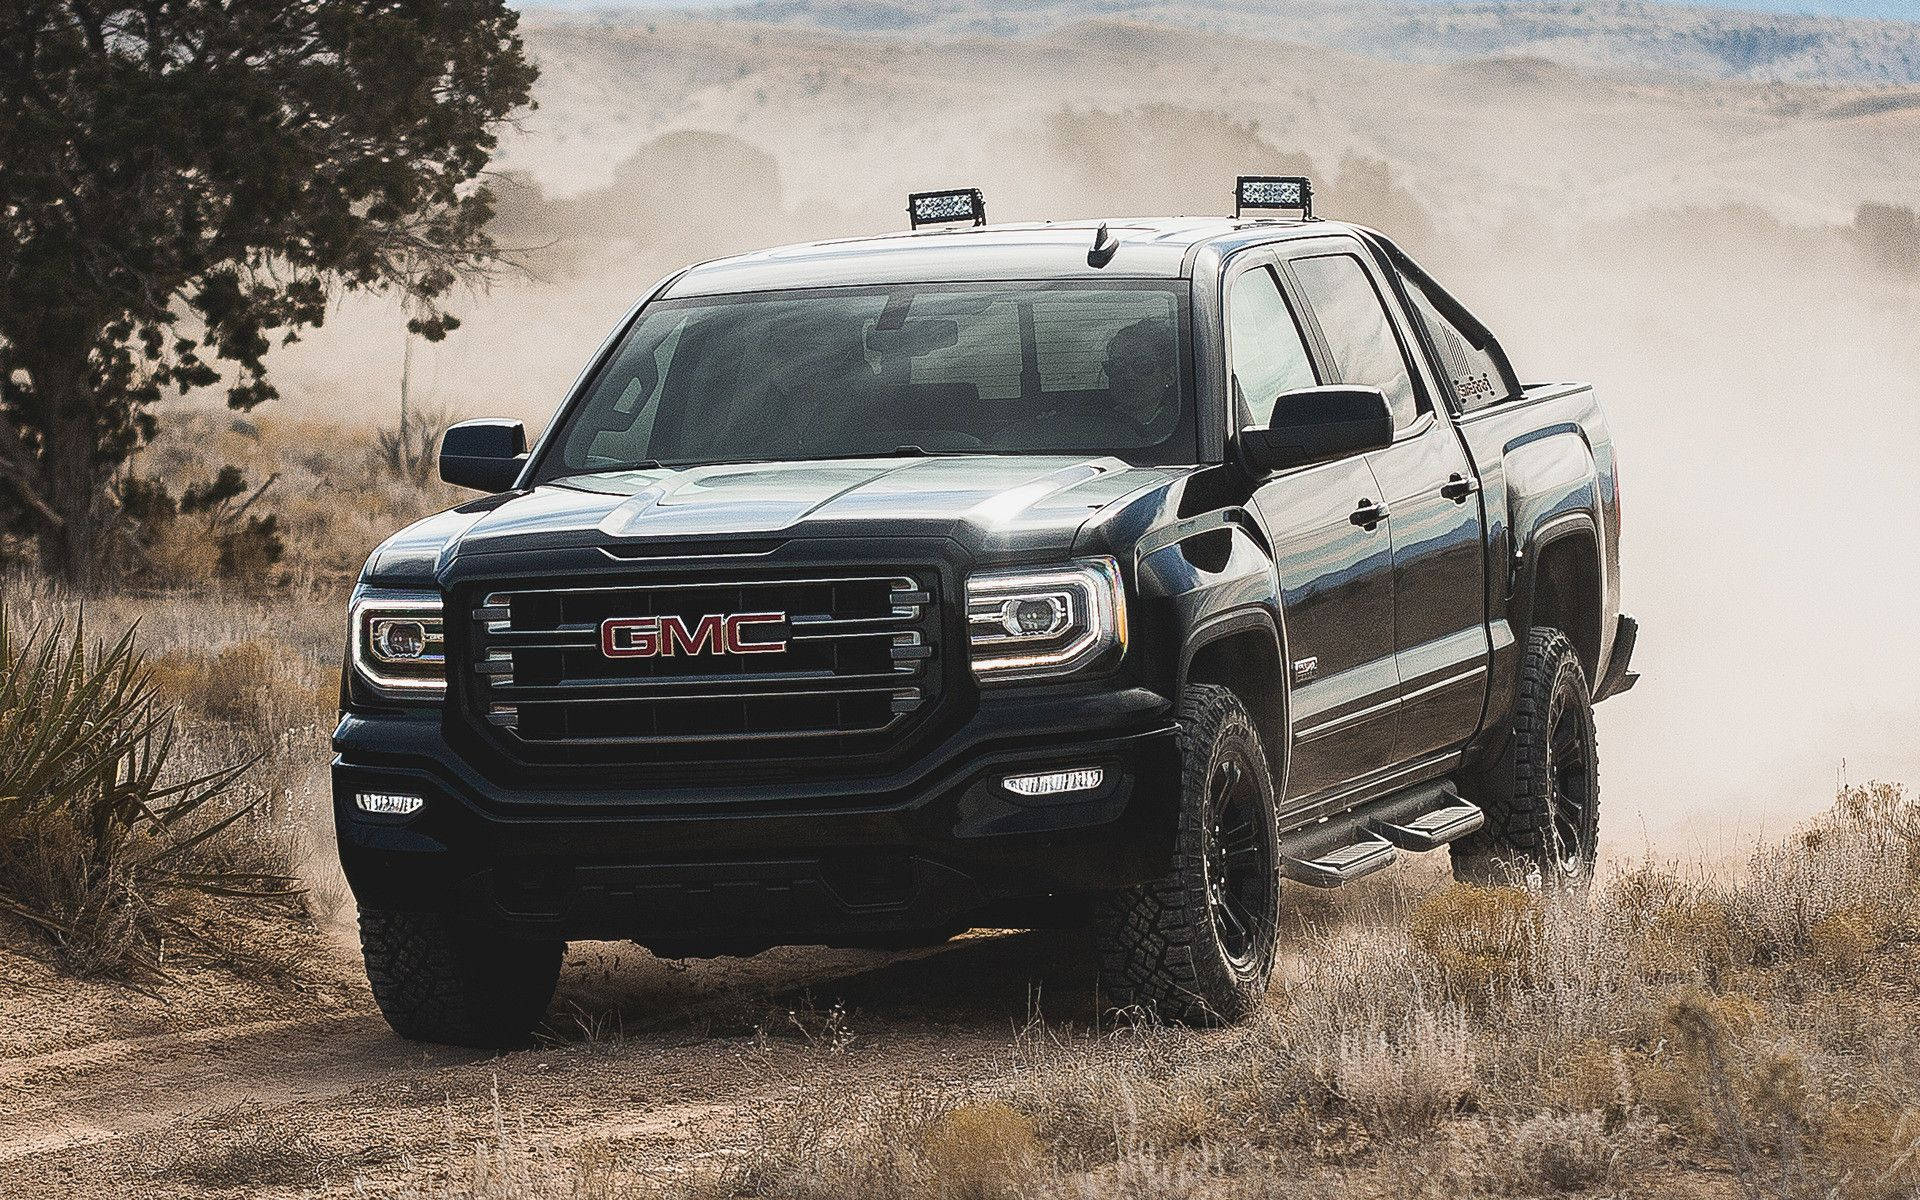 Gmc In A Sandy Area Background